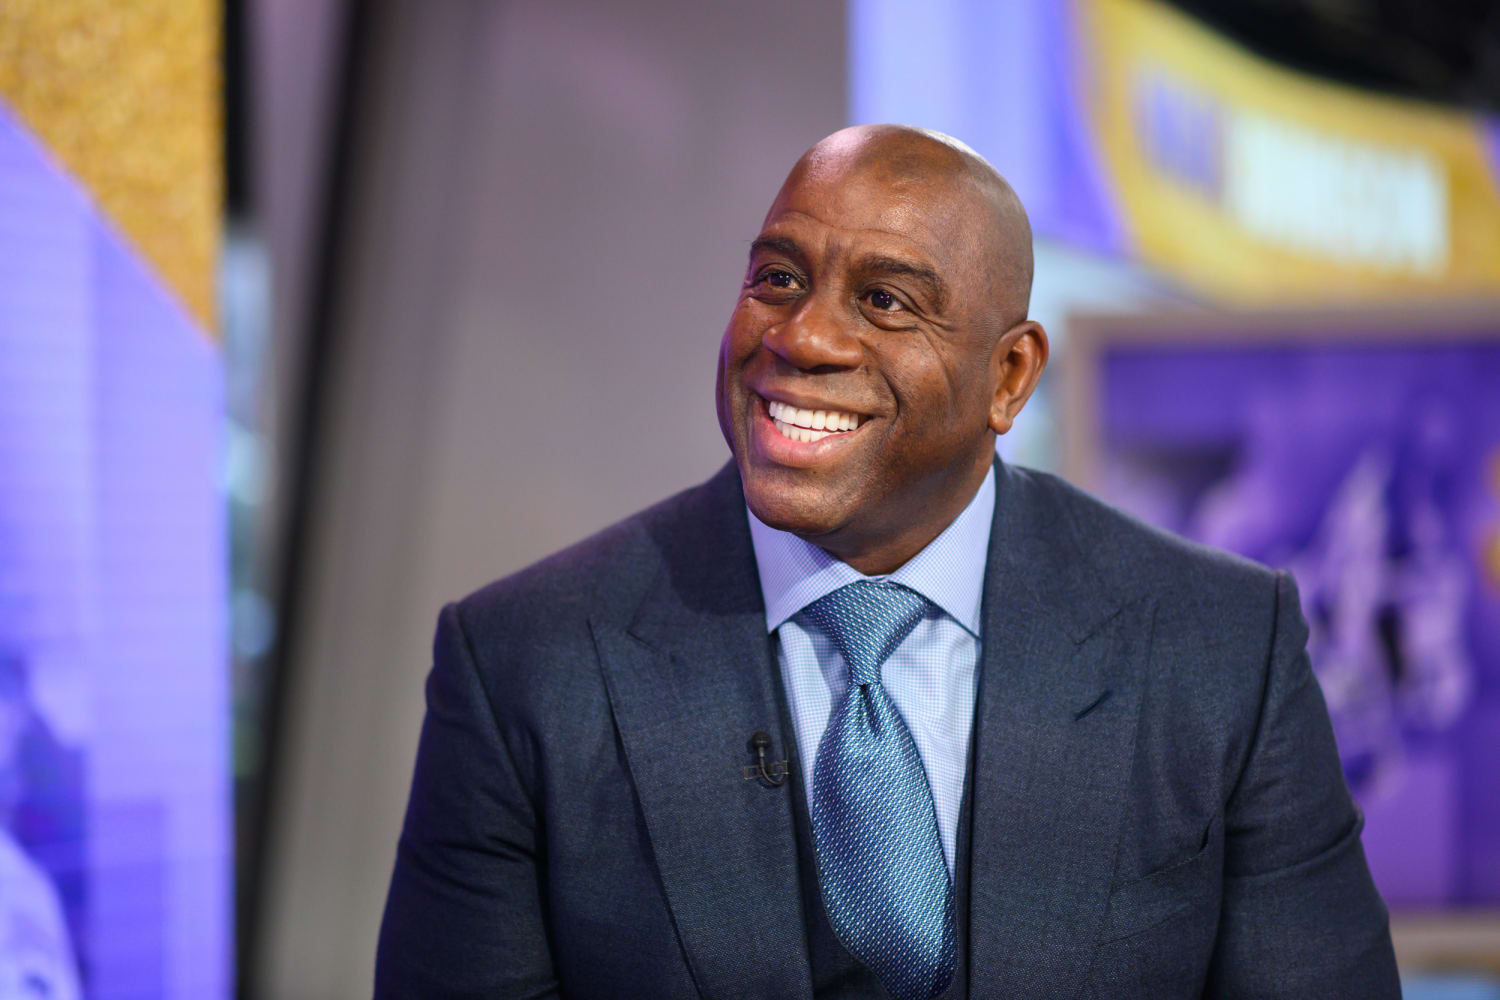 Magic Johnson officially joins NFL's Commanders as co-owner